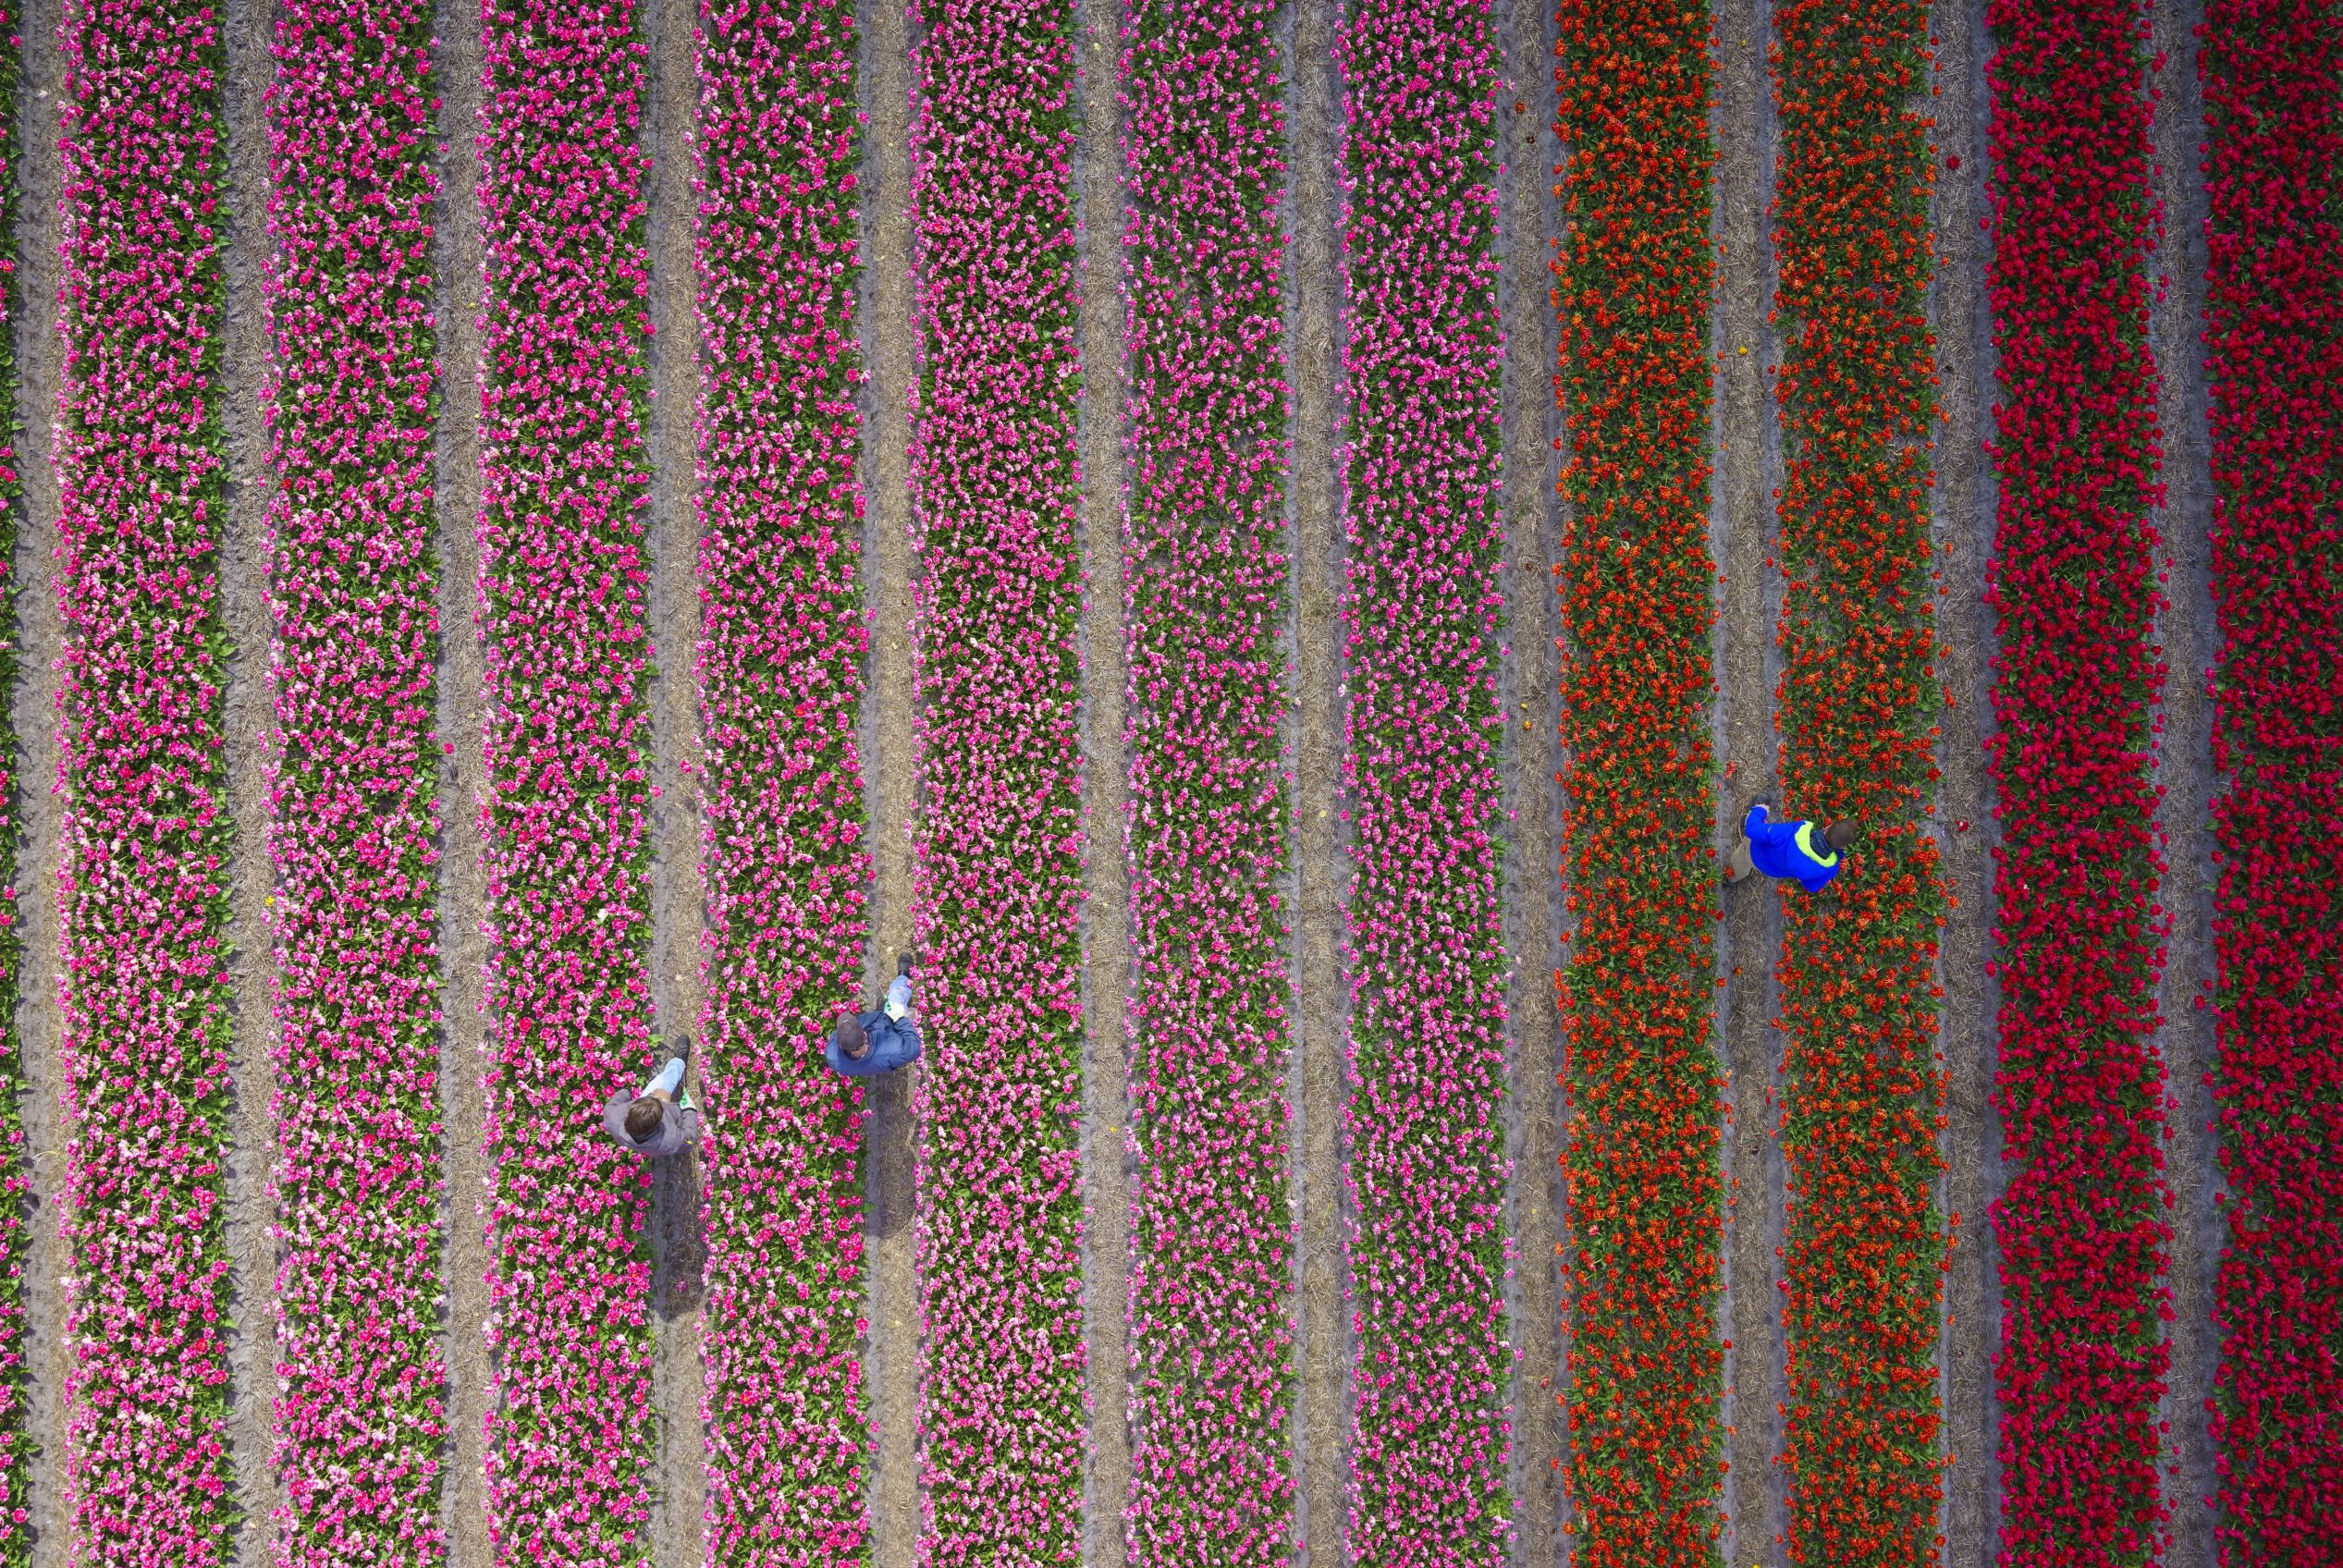 Slide 50 of 100: A photographer has shot a series of stunning aerial photographs of the tulip fields in the Netherlands using a drone. The photos reveal striped fields of red, yellow, purple, black and blue tulips. Meanwhile, large areas of hyacinths can be seen draped around the surrounding areas. Swedish-based photographer Anders Andersson, 42, said: "My idea was to create abstract patterns of colour, something like the Dutch artist Mondrian did with a paint brush." Anders used Google Earth to scan the Netherlands in order to find the right location to shoot the Tulip Field series. He settled on the 'tulip-mania district' near Sassenheim, Netherlands. He had to time the project carefully to ensure the flowers were in full-bloom, whilst ensuring they had not yet been cut and sold. Anders subscribed to a Dutch tulip newsletters and anxiously waited for the right moment.